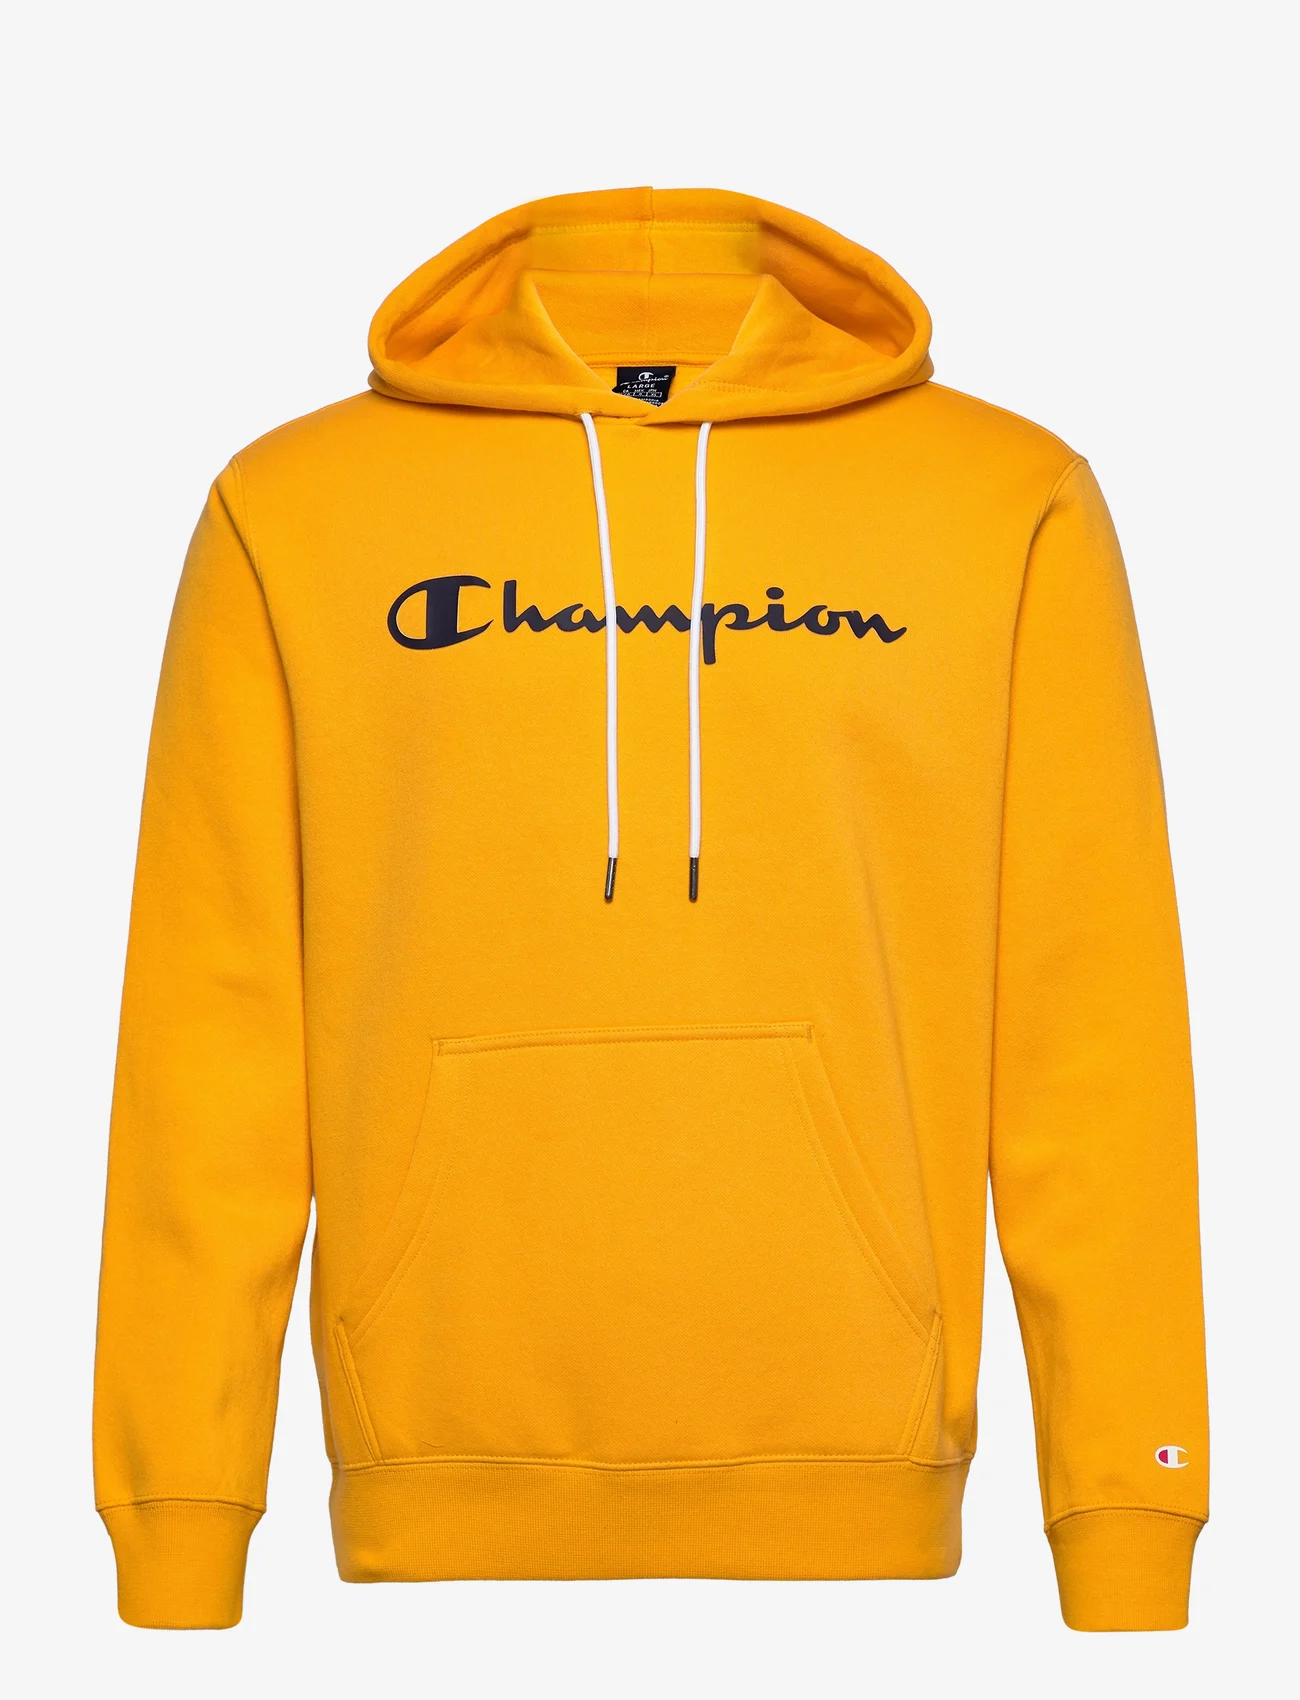 kennis Oordeel Werkgever Champion Hooded Sweatshirt (Radiant Yellow), (31.69 €) | Large selection of  outlet-styles | Booztlet.com